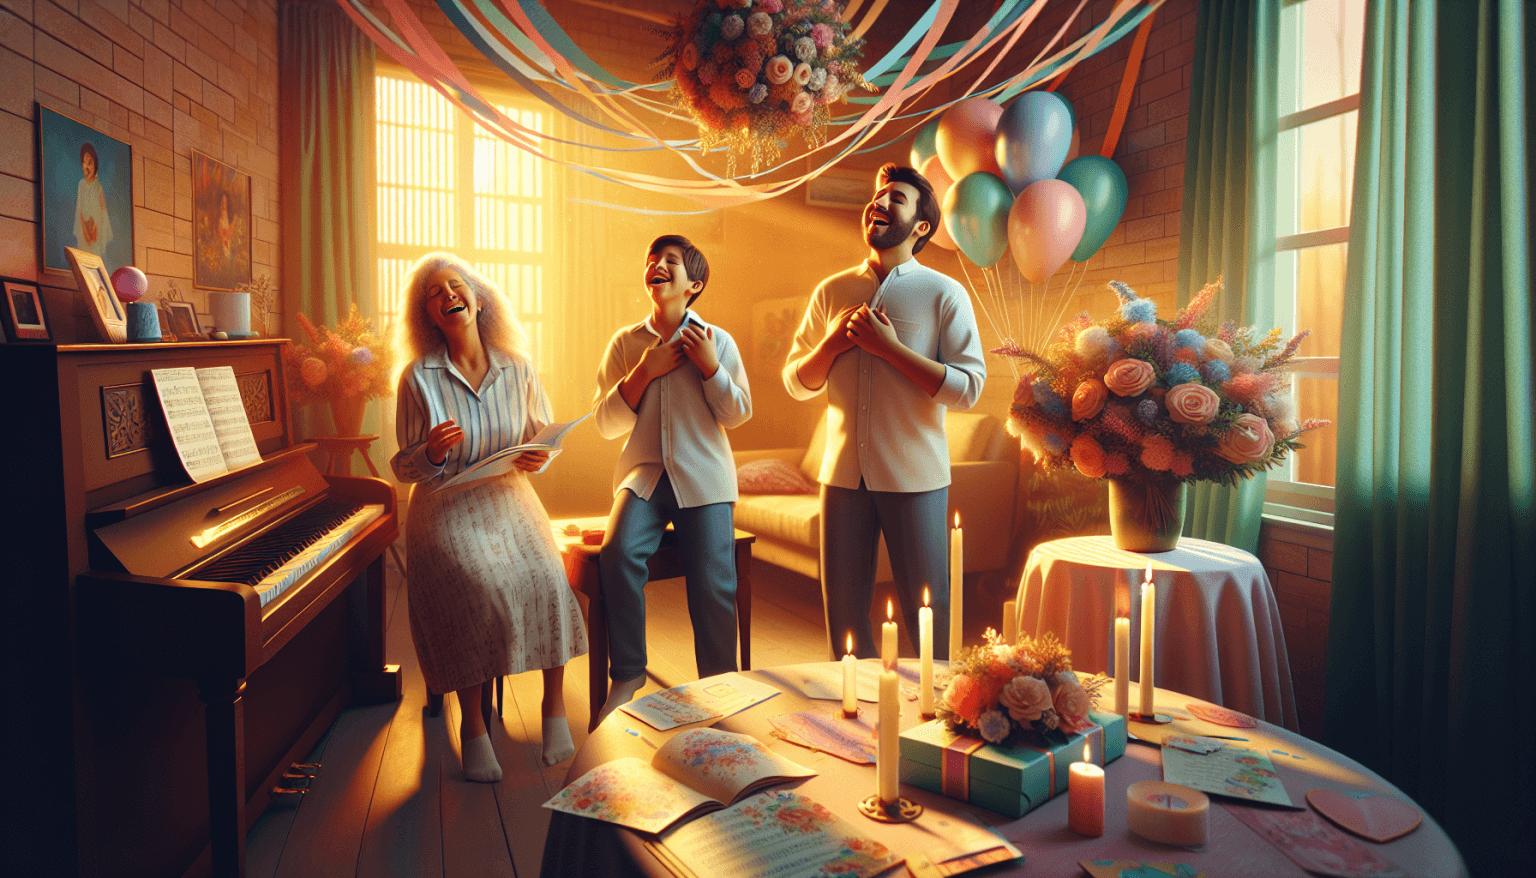 A warm, cozy living room at sunset, decorated with pastel-colored streamers and balloons. A family of diverse Latin American descent, including a smiling mother, father, son, and daughter, are gathere